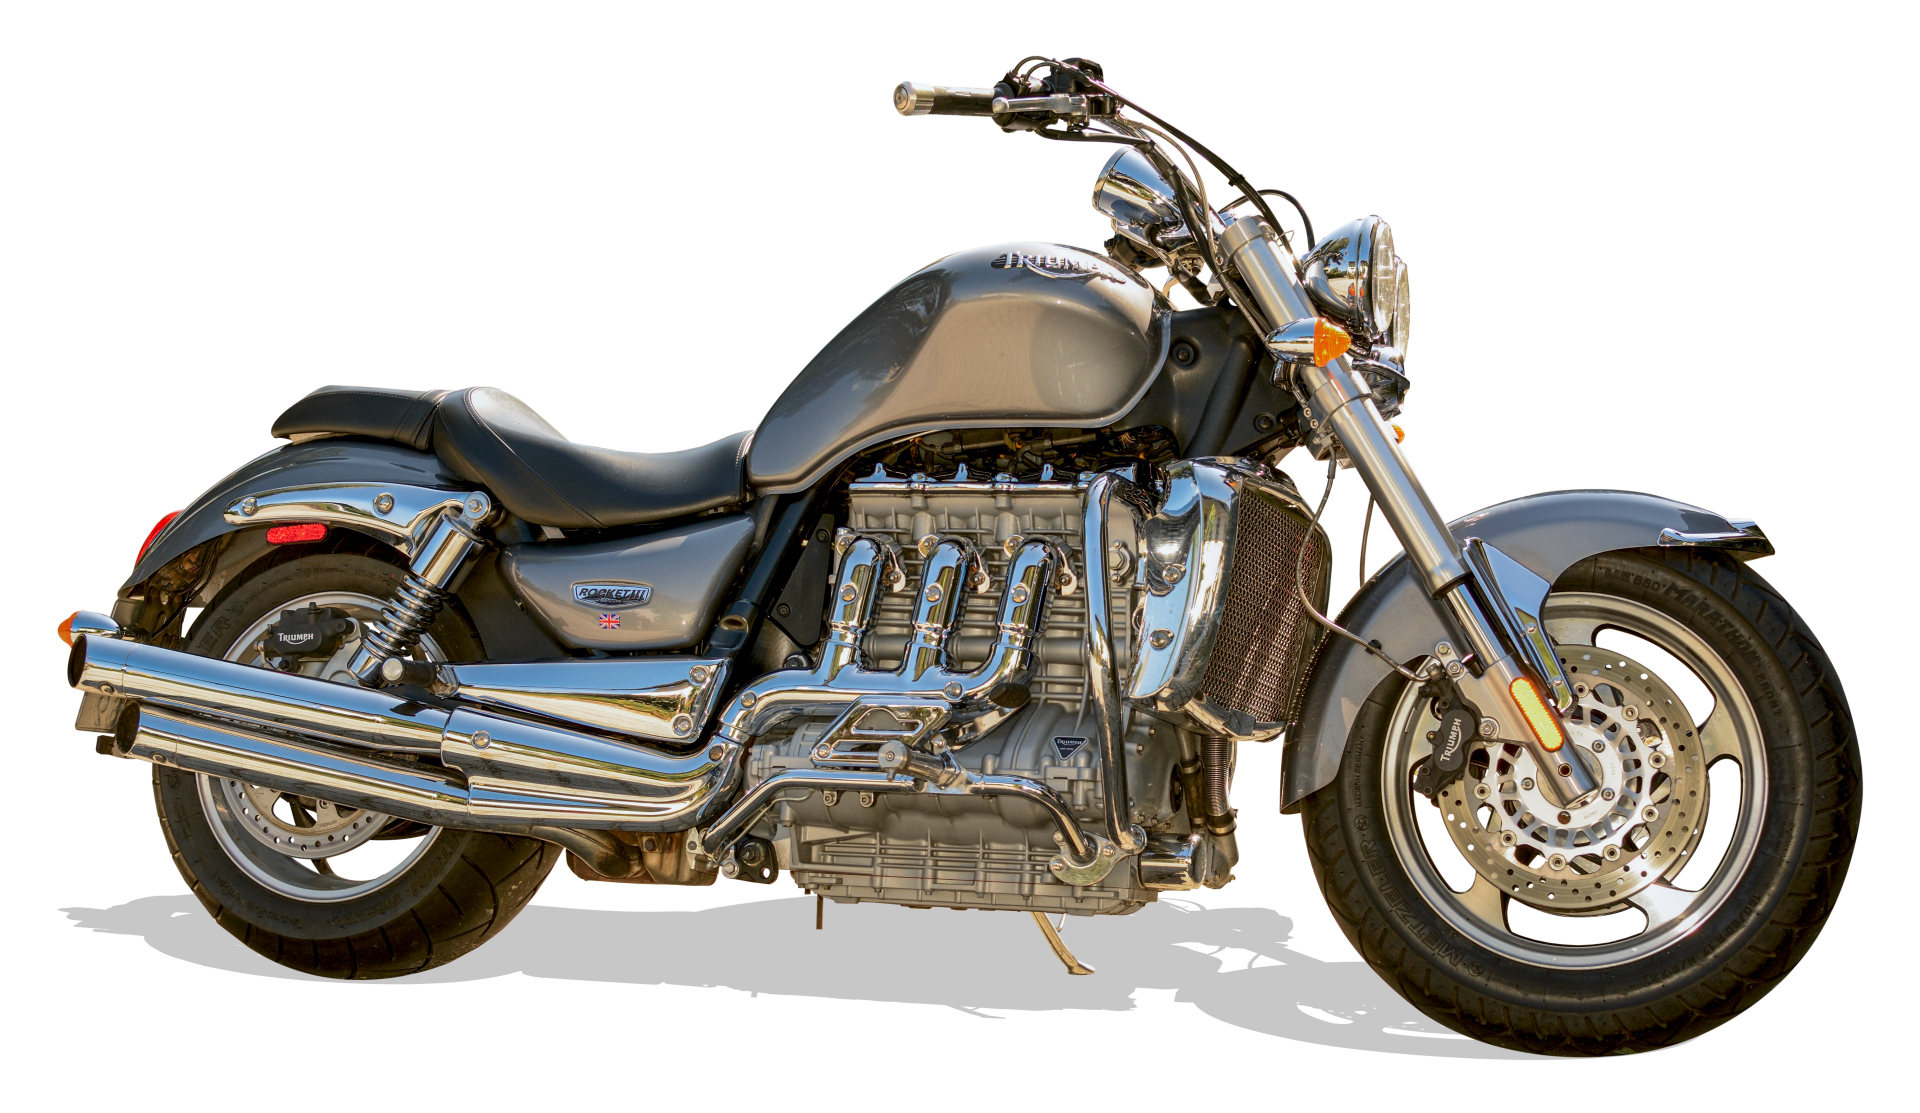 Motorcycle Triumph Rocket 3 cut out and on transparent background